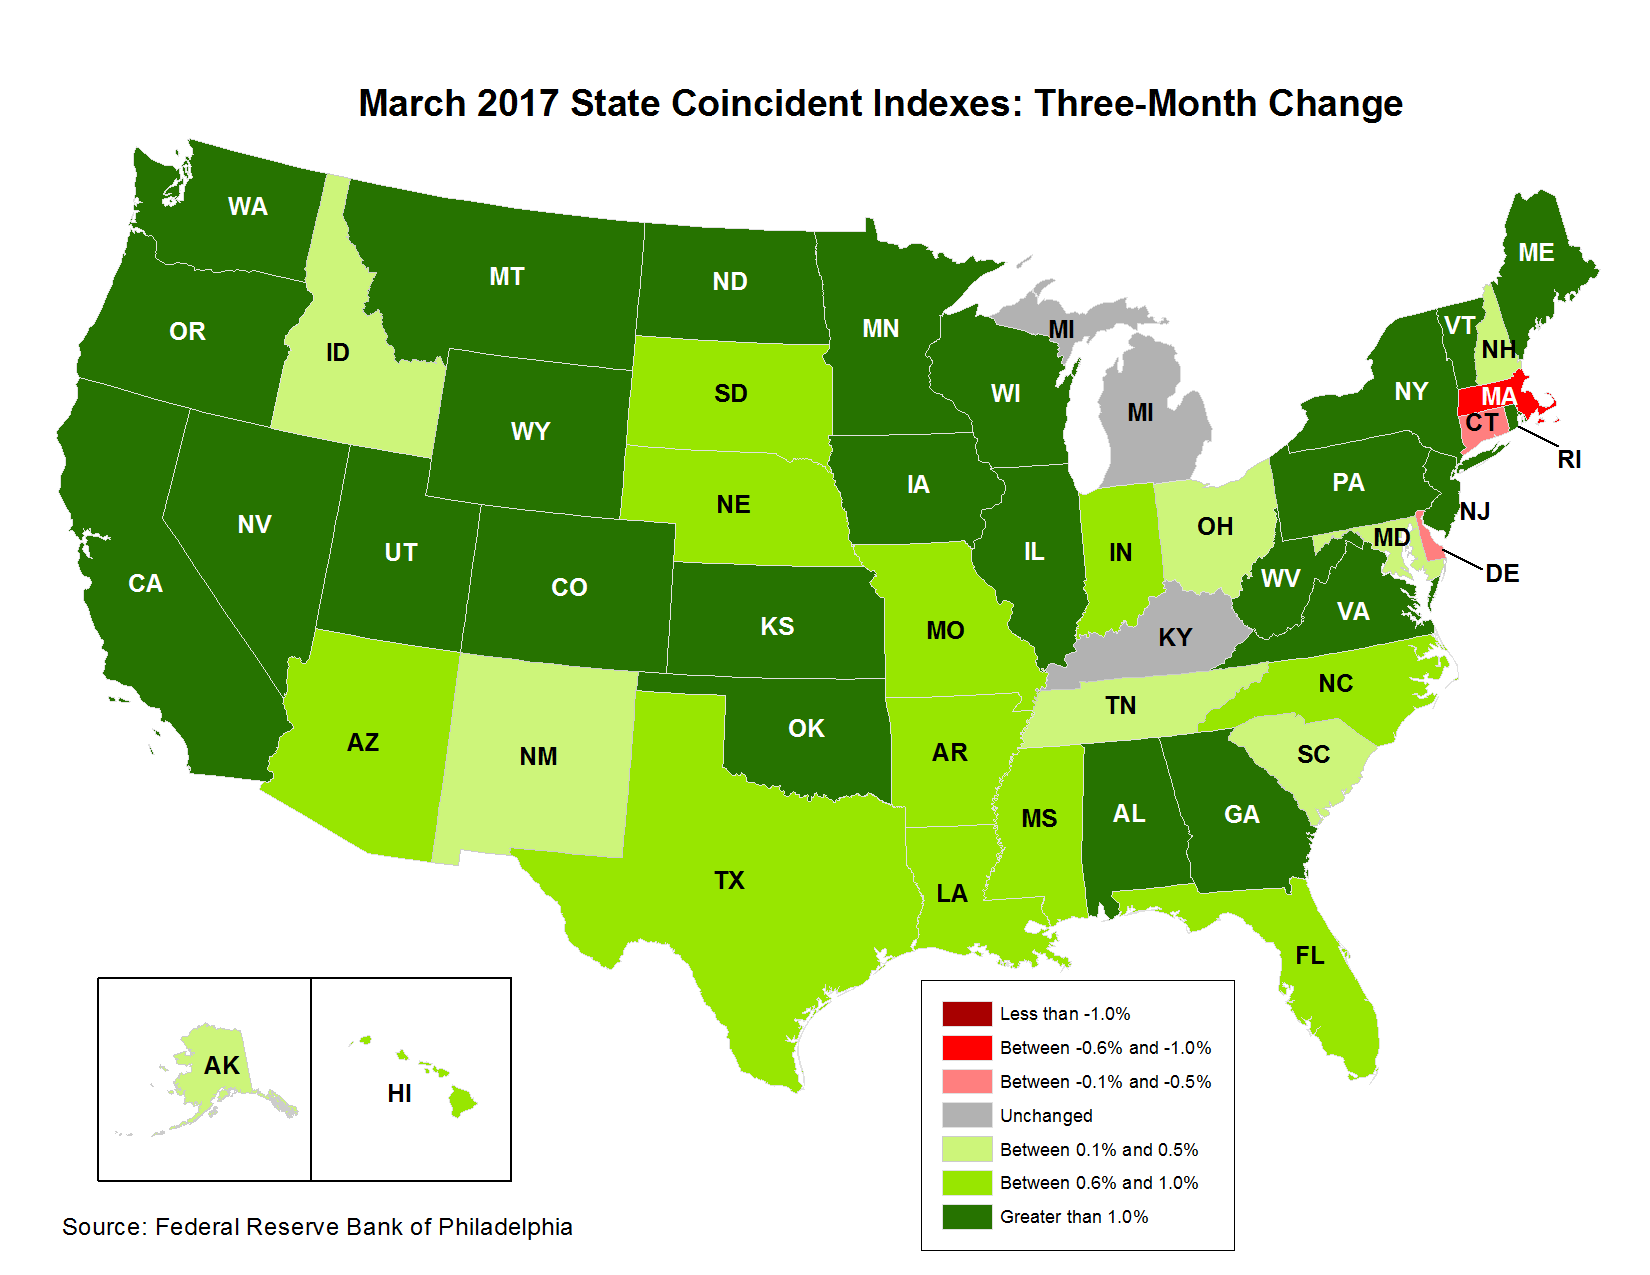 Map of the U.S. showing the State Coincident Indexes Three-Month Change in March 2017